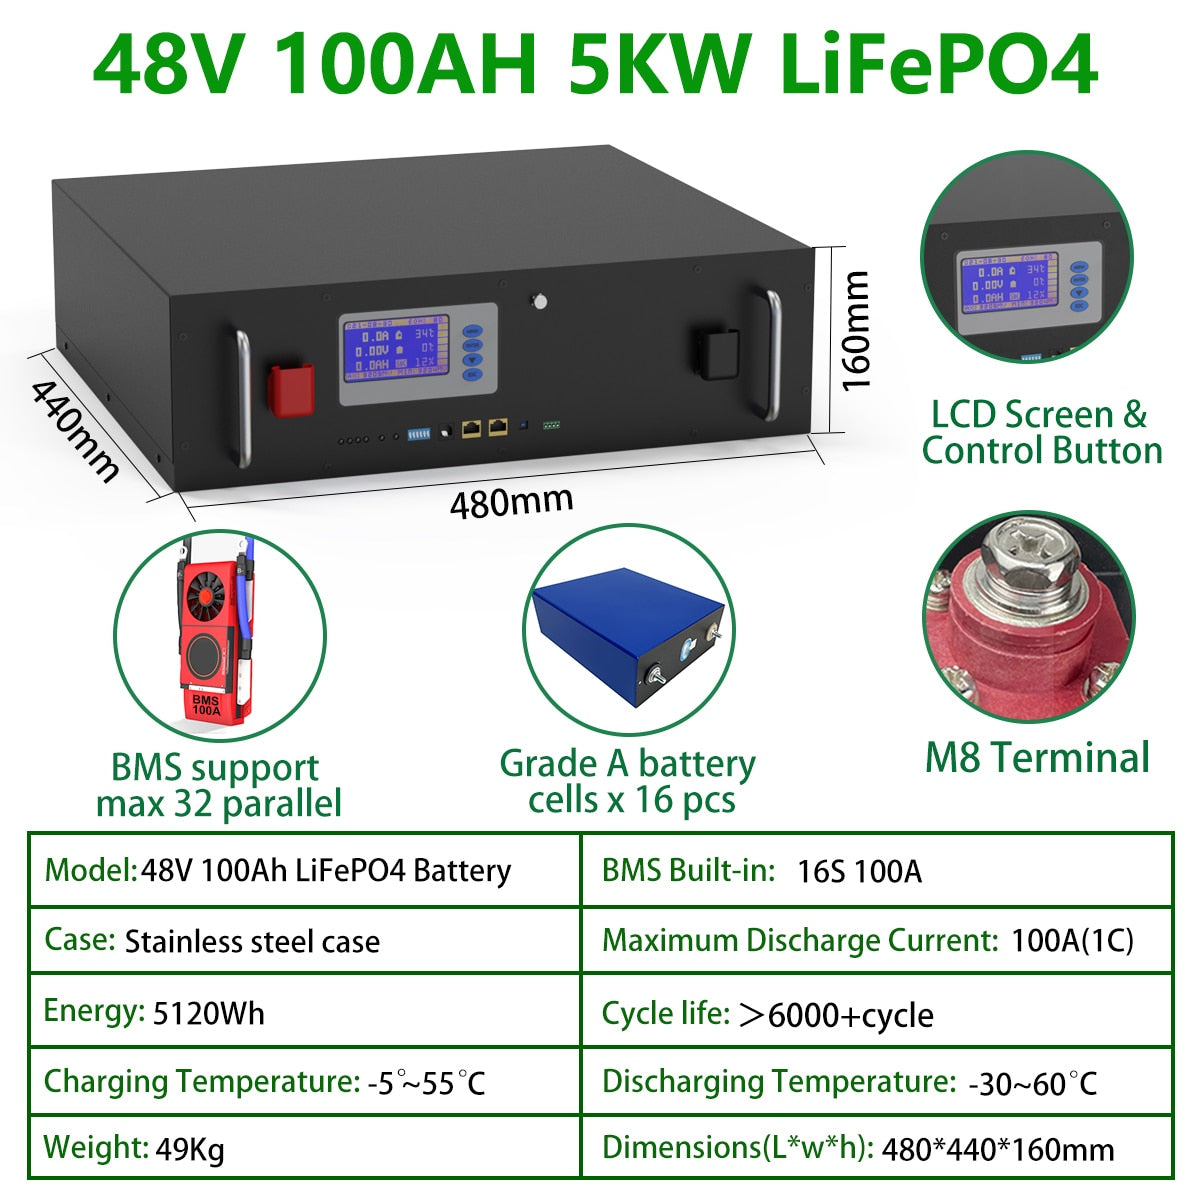 LiFePO4 48V 100AH Battery Pack - 5KW Lithium Solar Battery 6000+ Cycles PC Control RS485/CAN Communication For Home Energy Storage